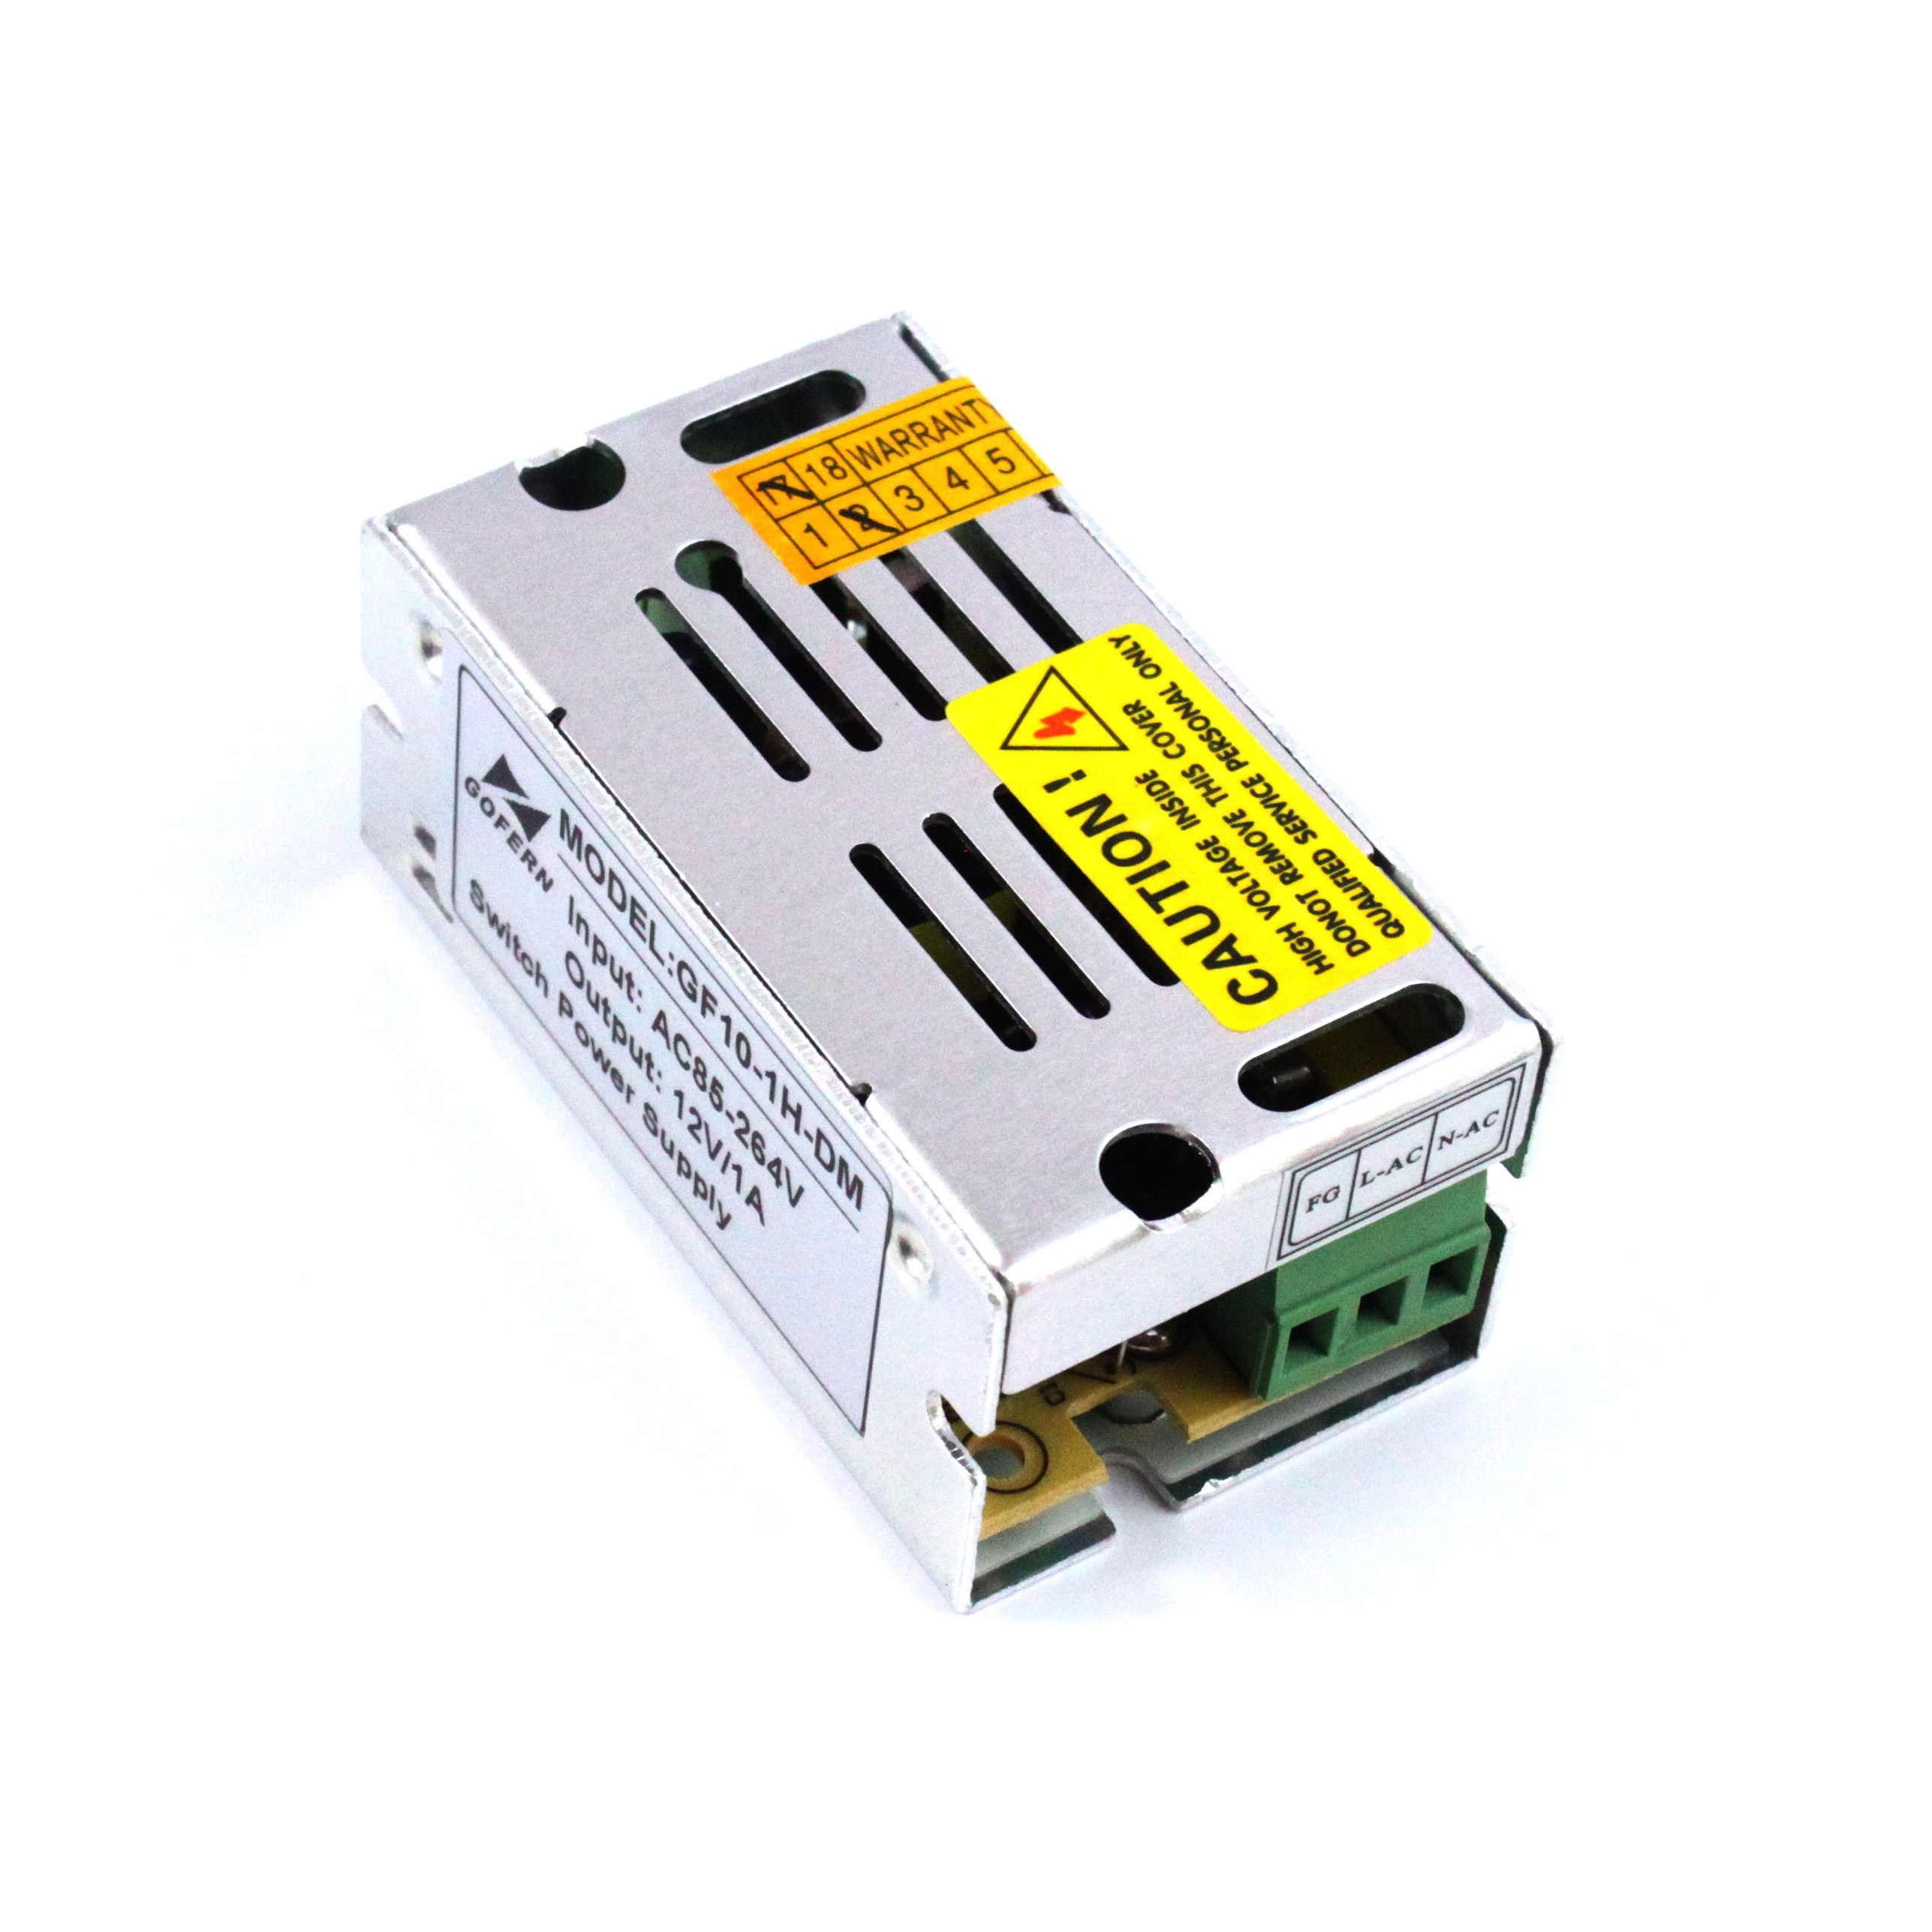 Mini size 10W power supply 5v 2a switch for CCTV